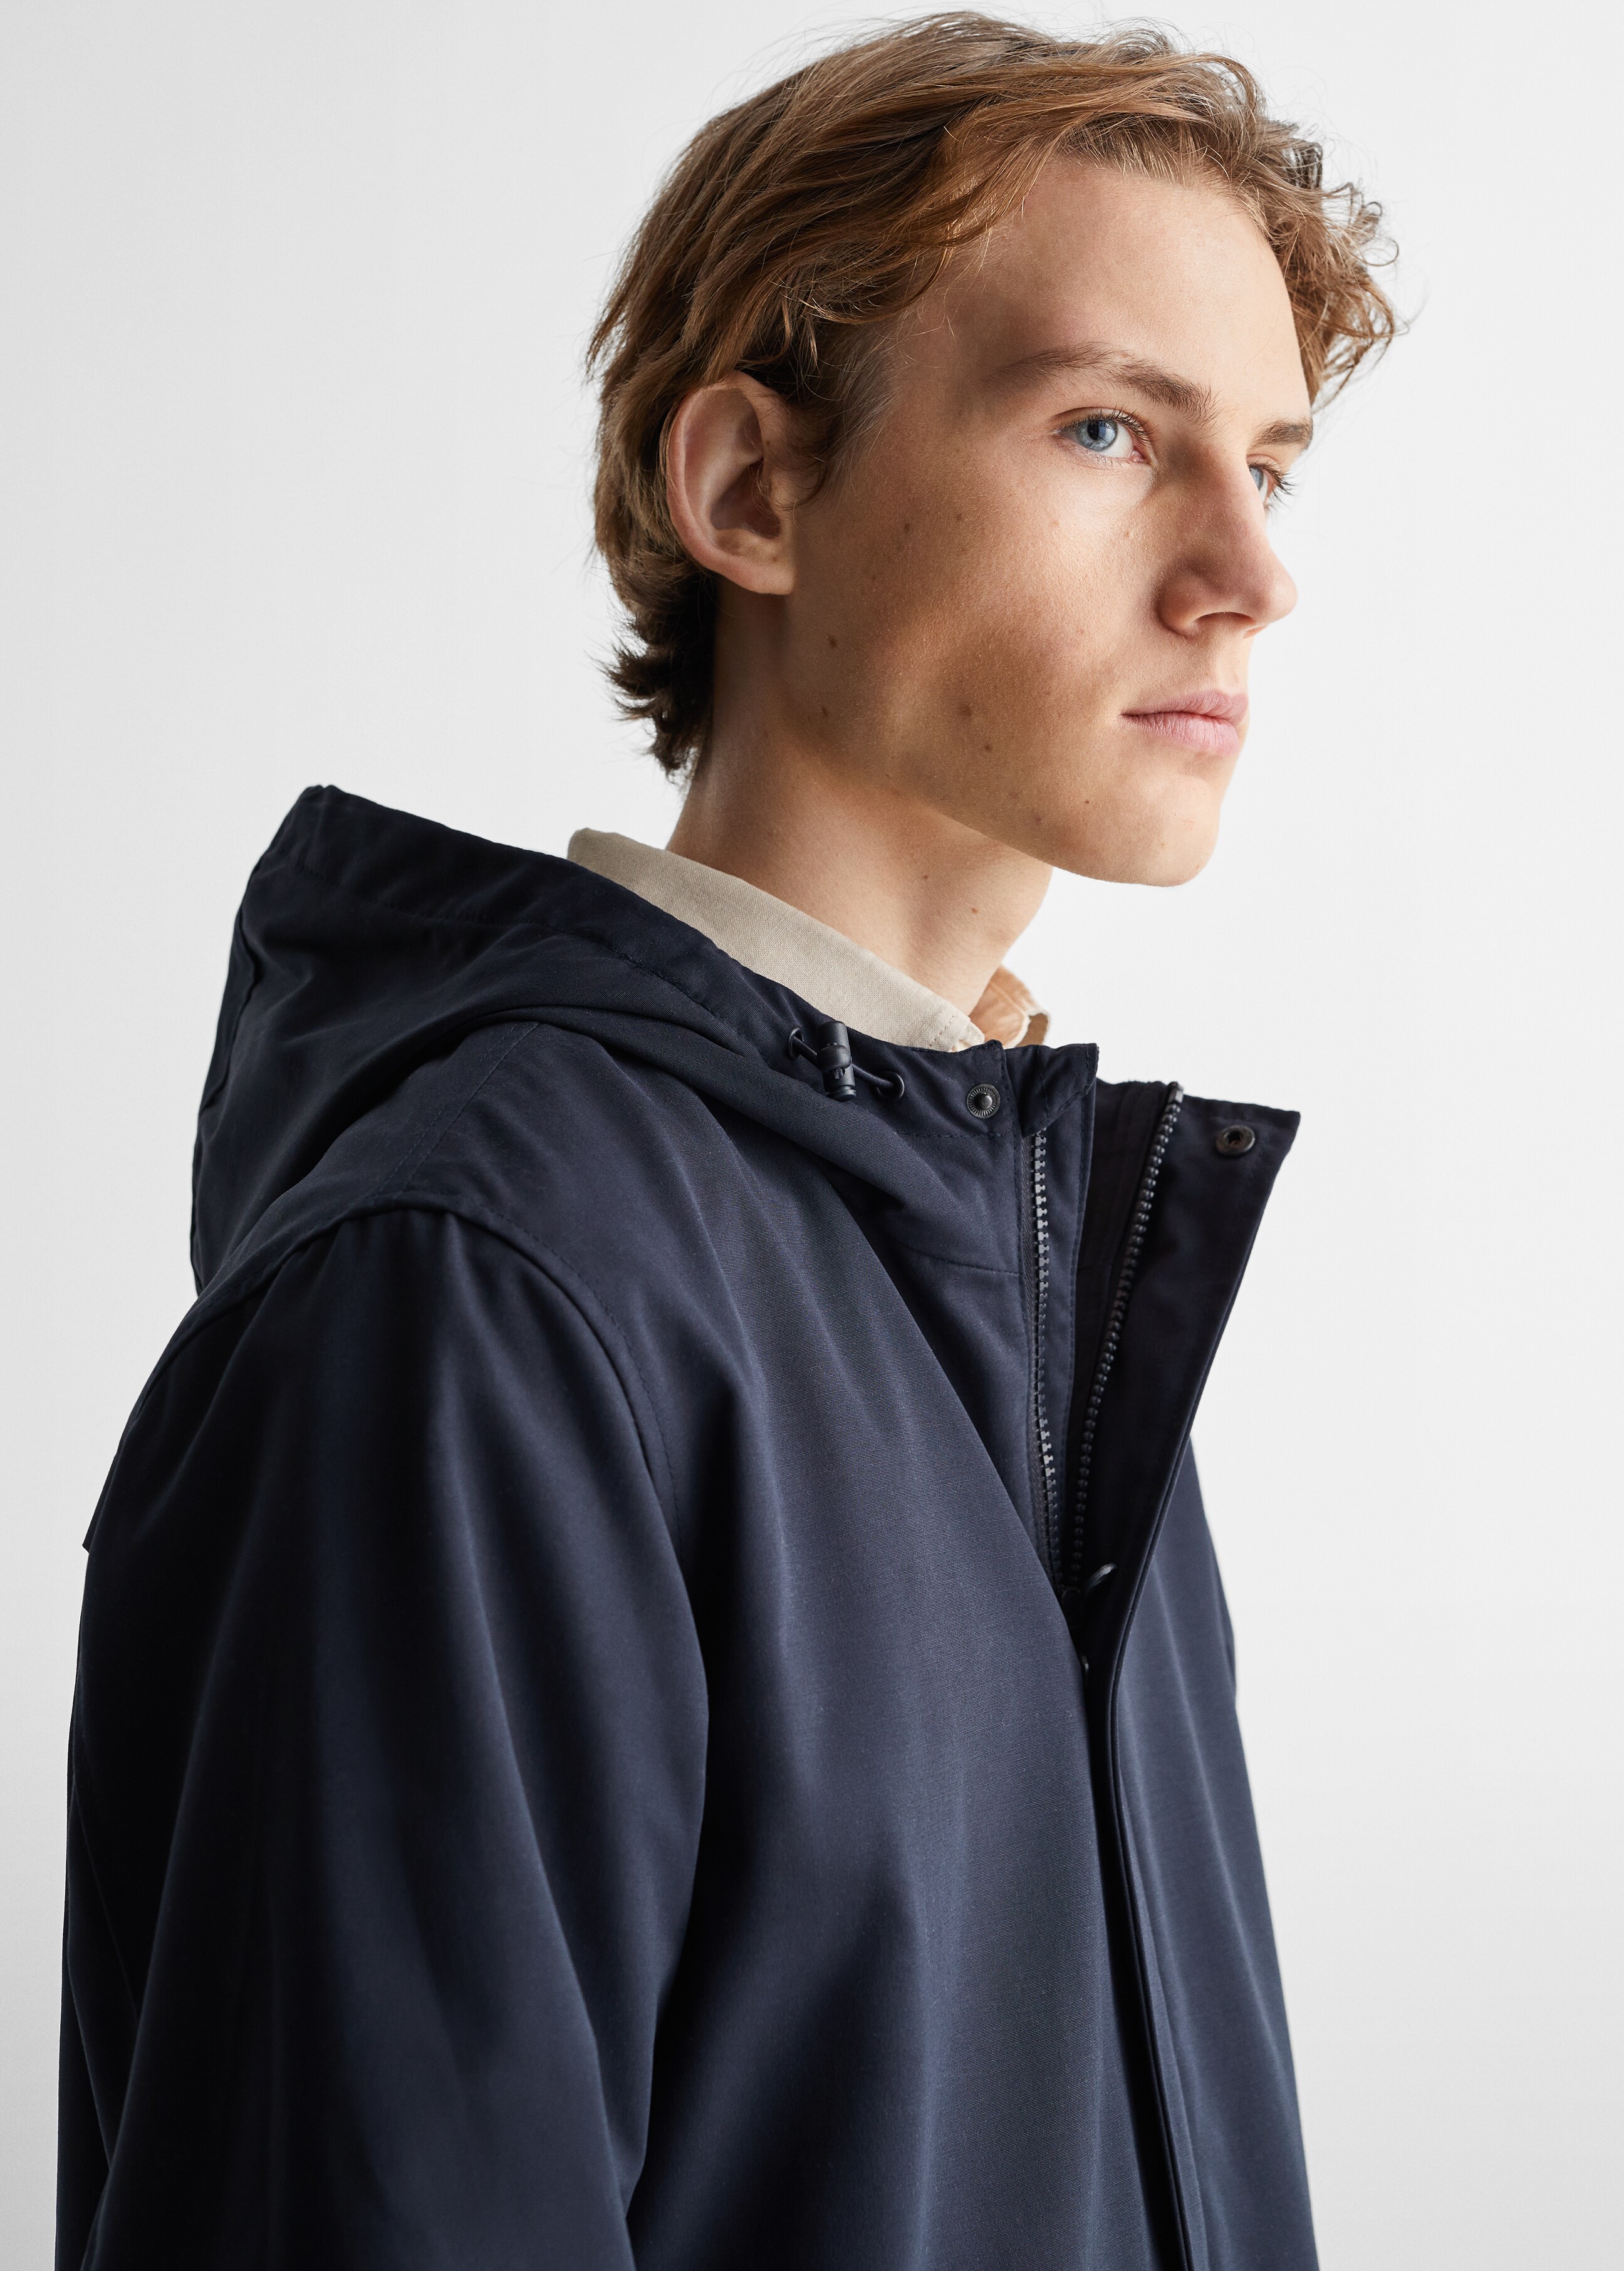 Hooded jacket - Details of the article 4